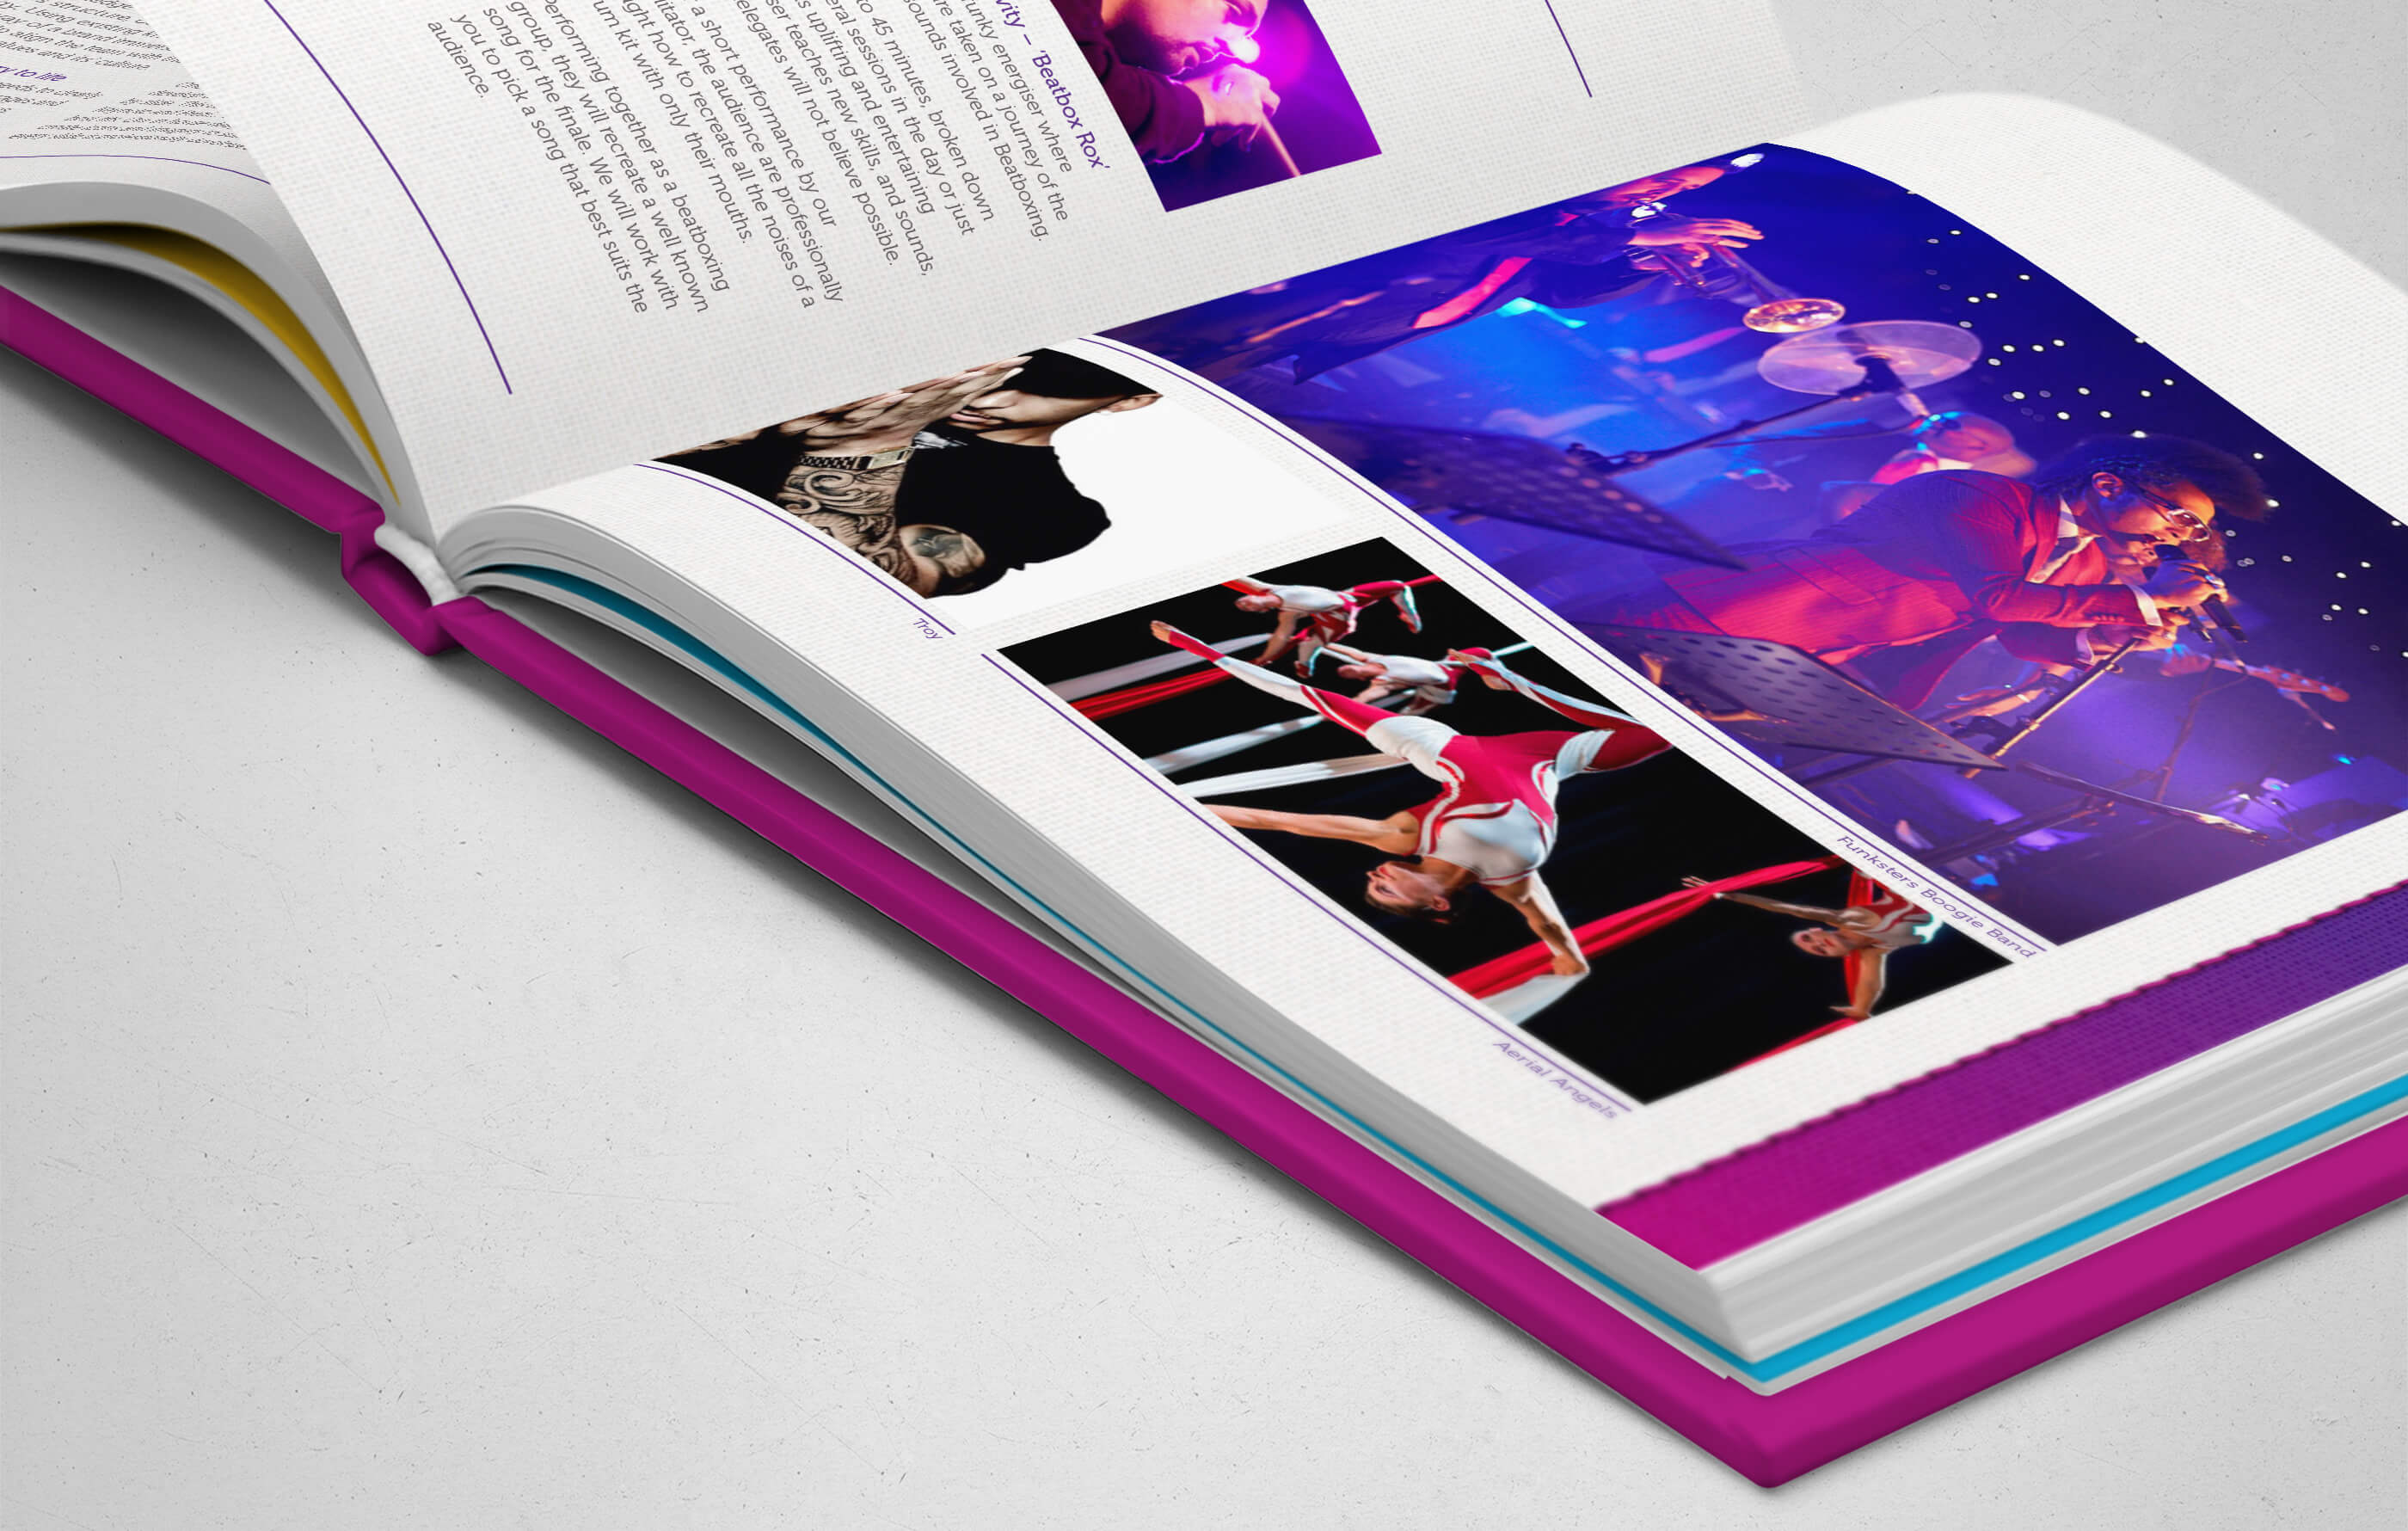 Close-up image of the proposal brochure, featuring evening entertainmnet acts such as Troy the magician